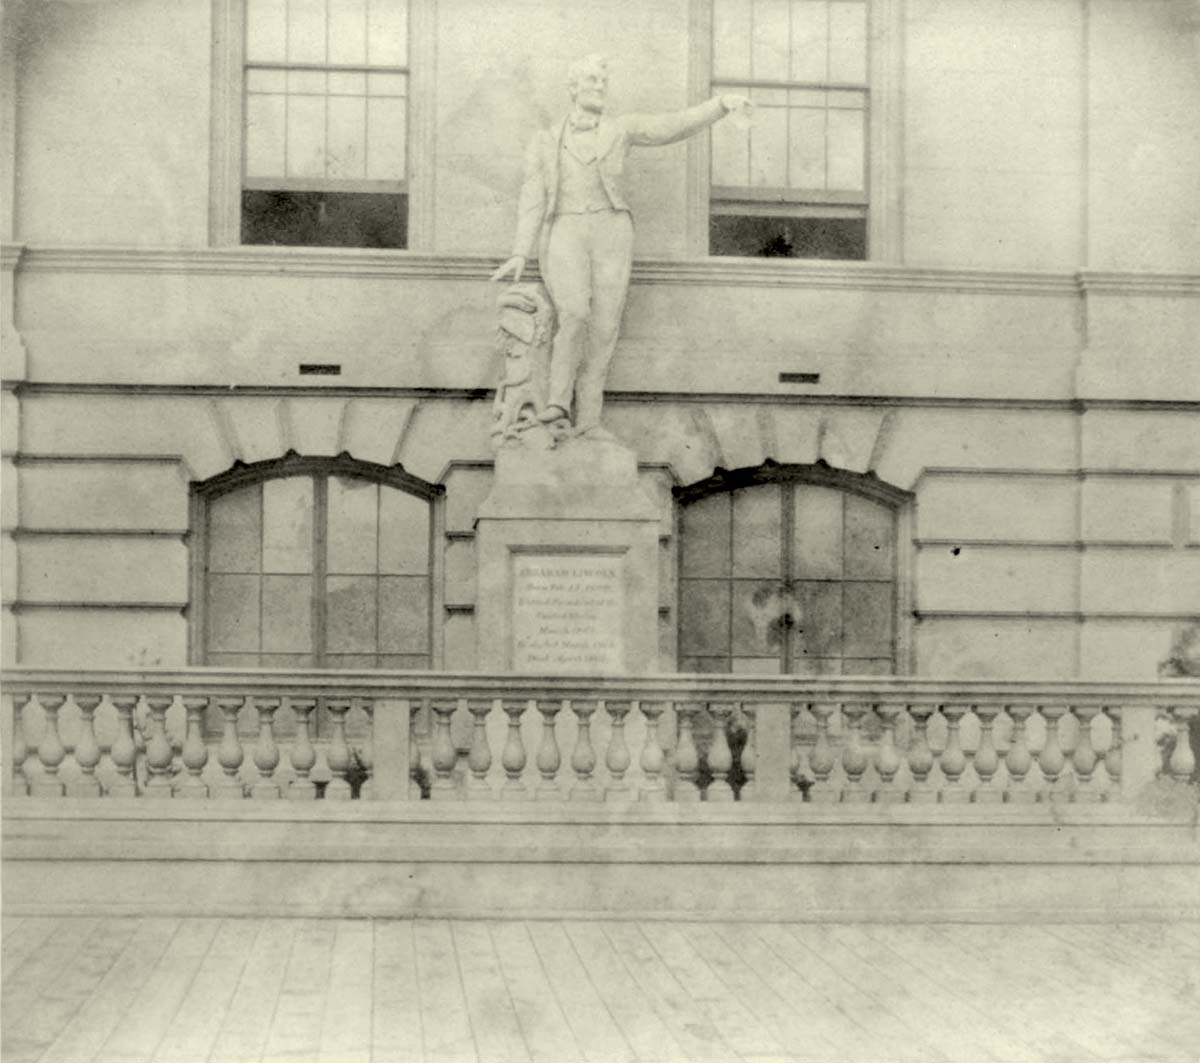 San Francisco, California. Statue of Lincoln, front of Lincoln School House, 5th Street, 1866